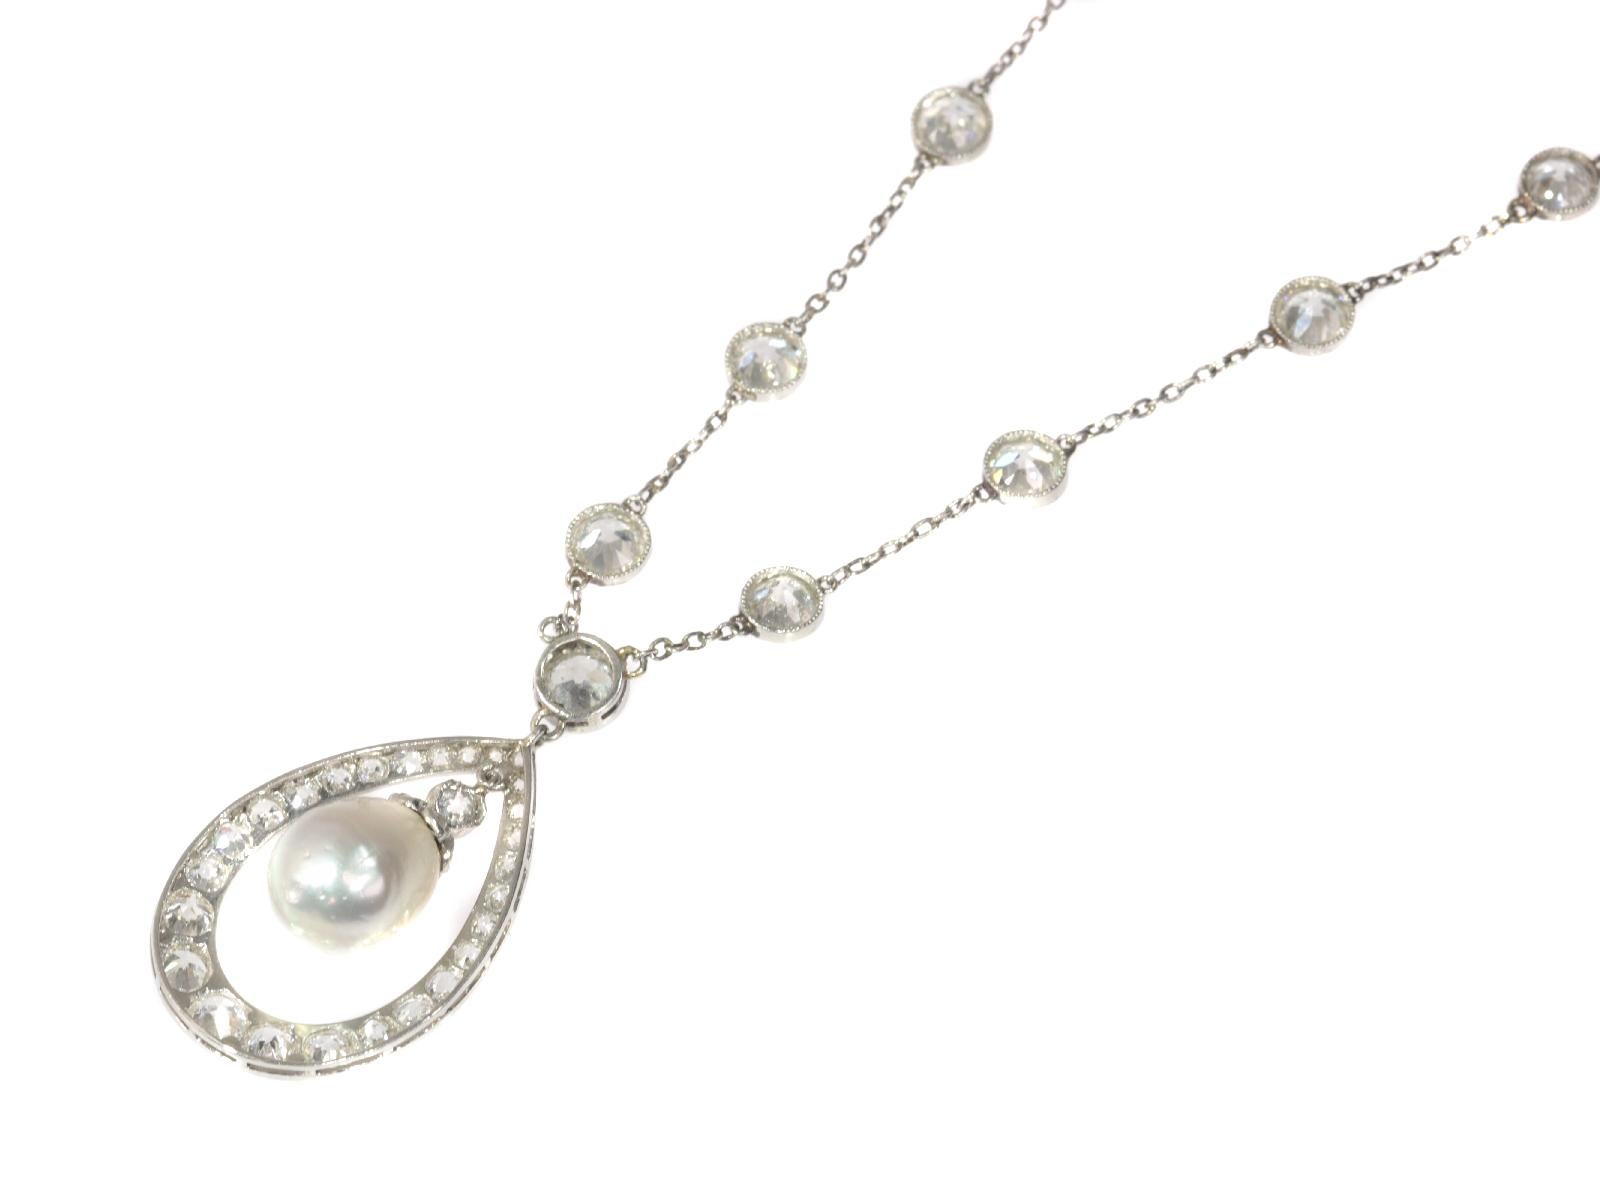 Platinum Art Deco Diamond Necklace with Natural Drop Pearl of 7 Carat, 1930s For Sale 6